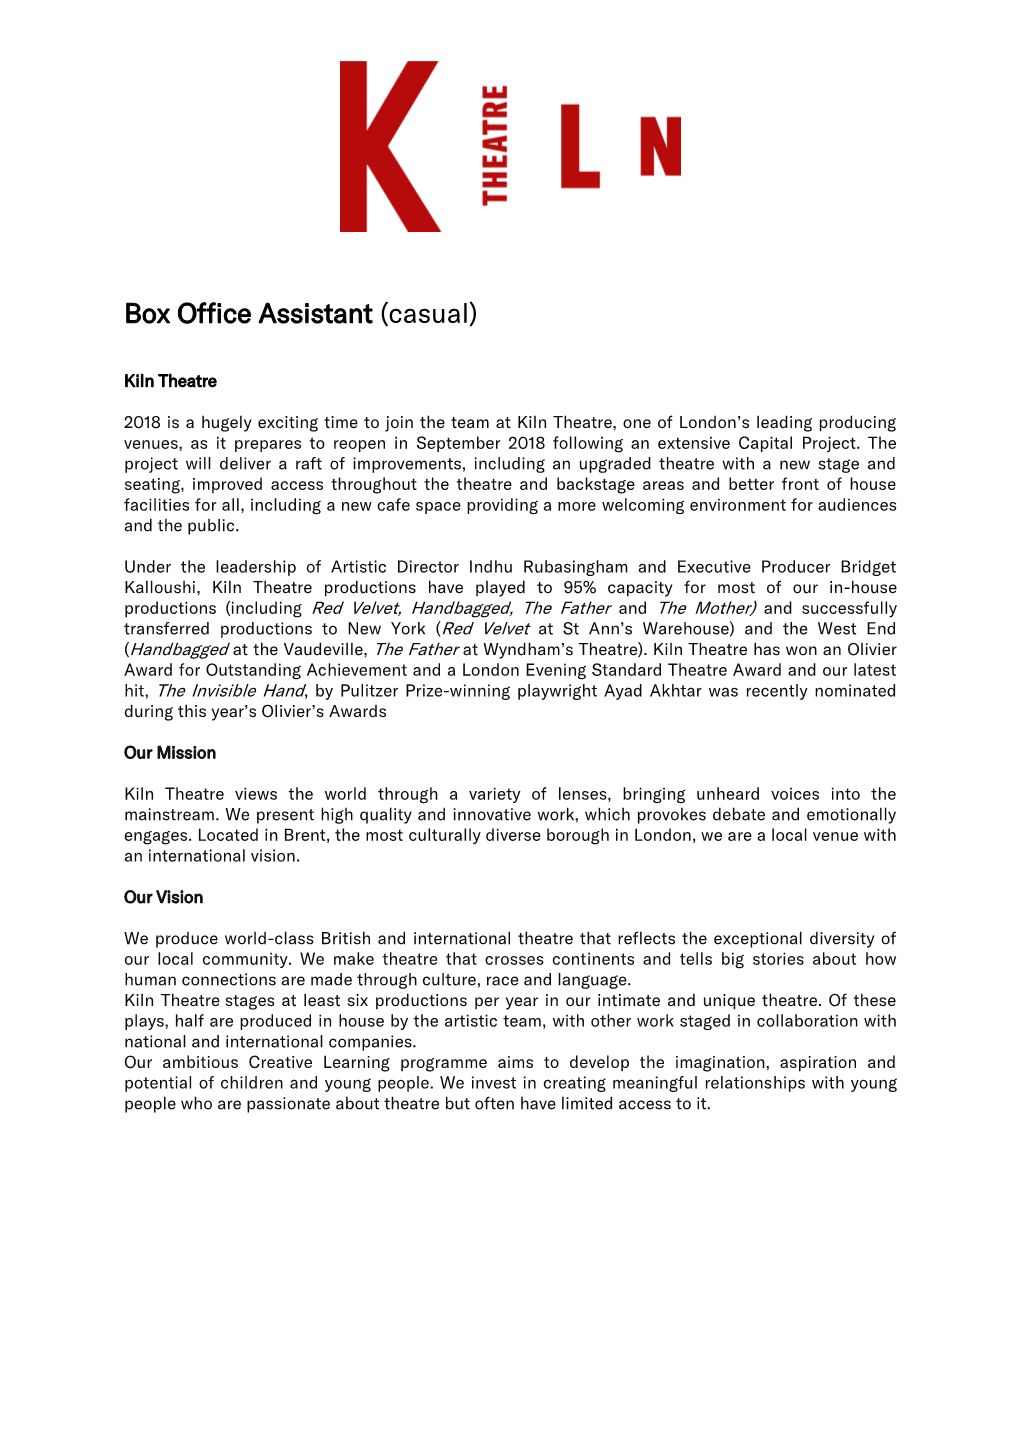 Box Office Assistant (Casual)